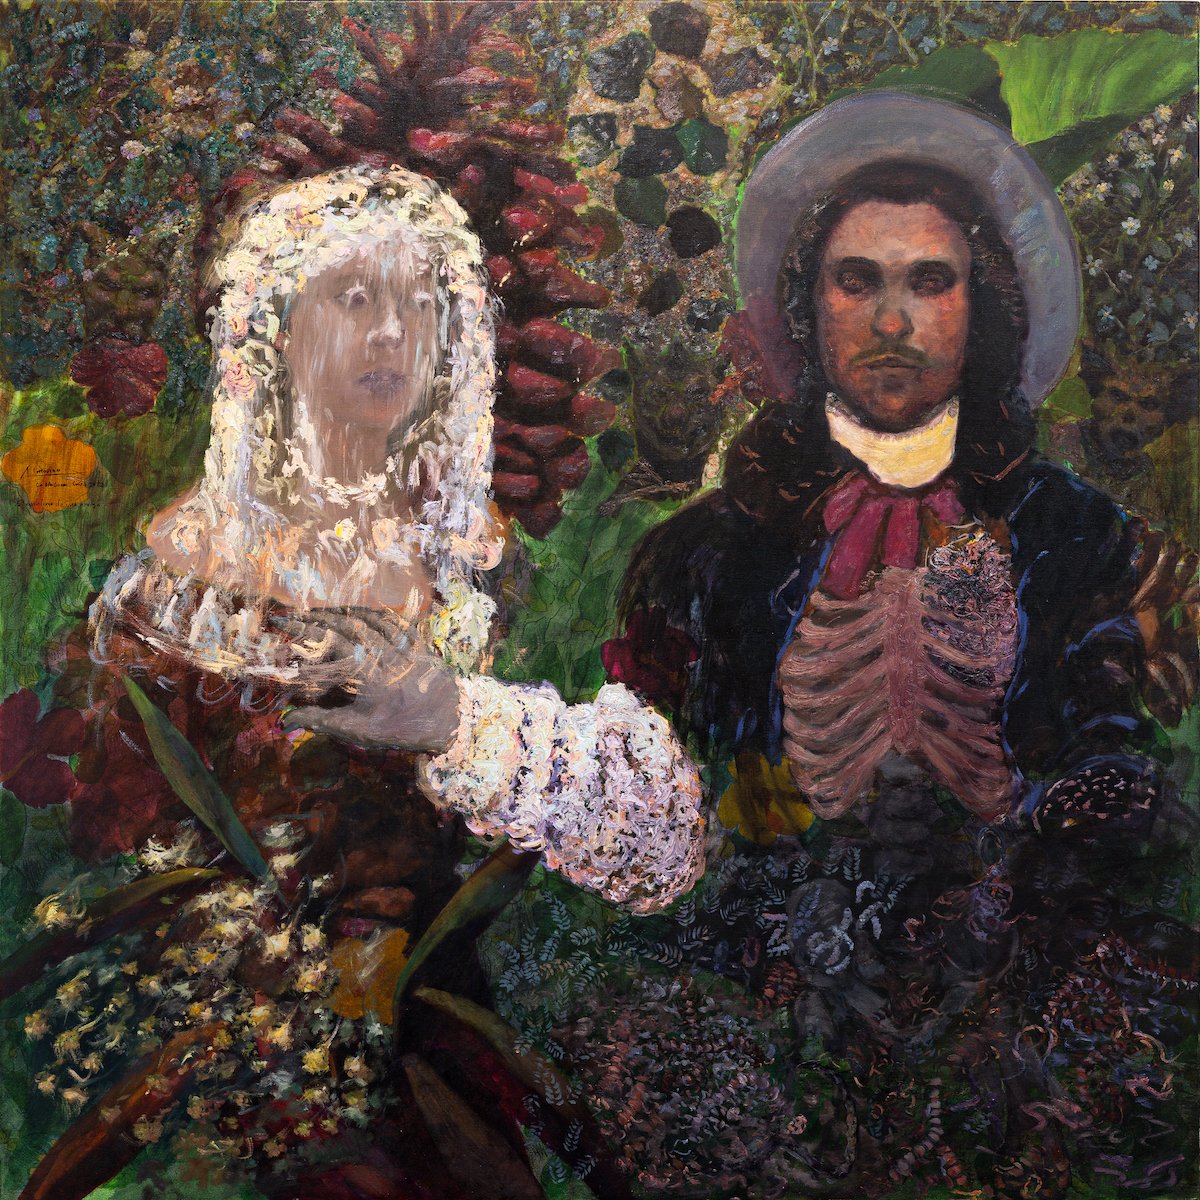 "The Martyrdom of a Friend" Original Oil Painting of a Couple in Lush Green Foliage by Orlando Almanza @ Soapbox Arts Gallery, Burlington, Vermont